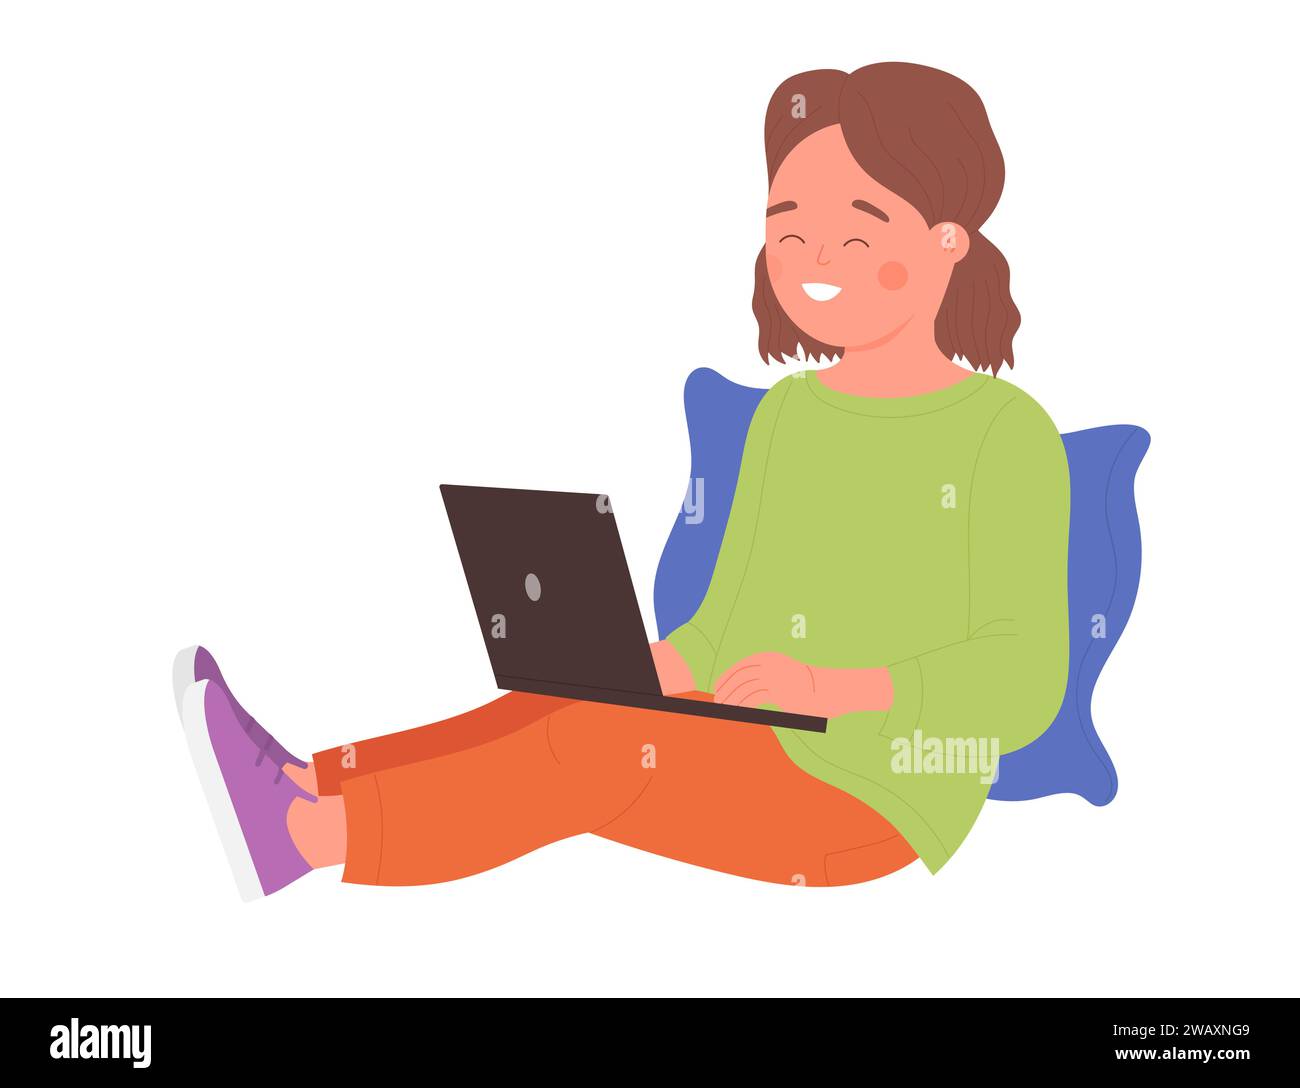 Kids using mobile phones, tablet and laptop for online games and study vector illustration. Cartoon happy friends sitting on couch in home interior background. Internet addiction problem concept Stock Vector